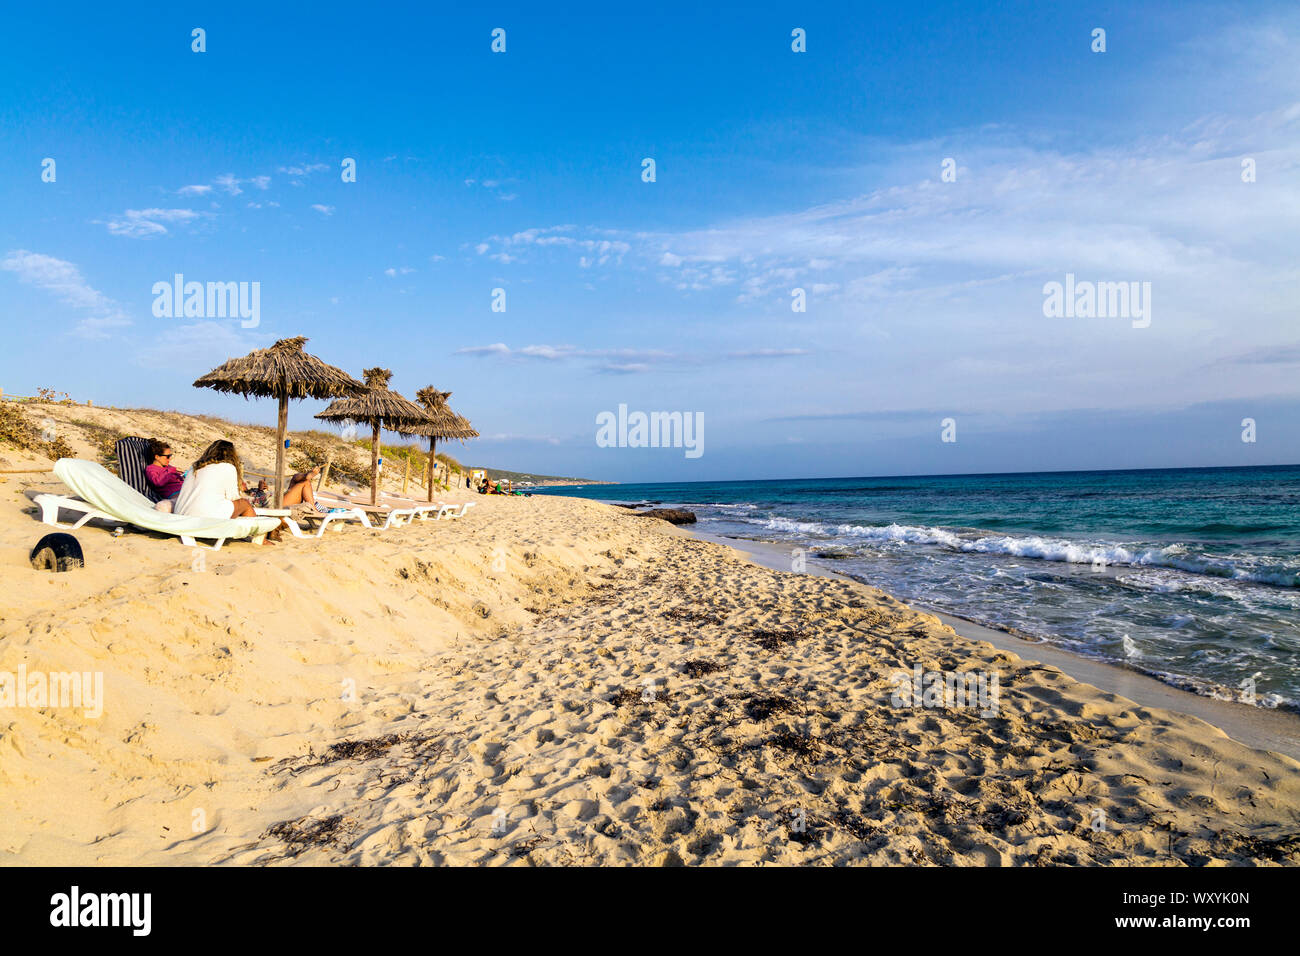 Straw parasols and sun beds on the beach at Playa de Migjorn, Formentera, Balearic Islands, Spain Stock Photo